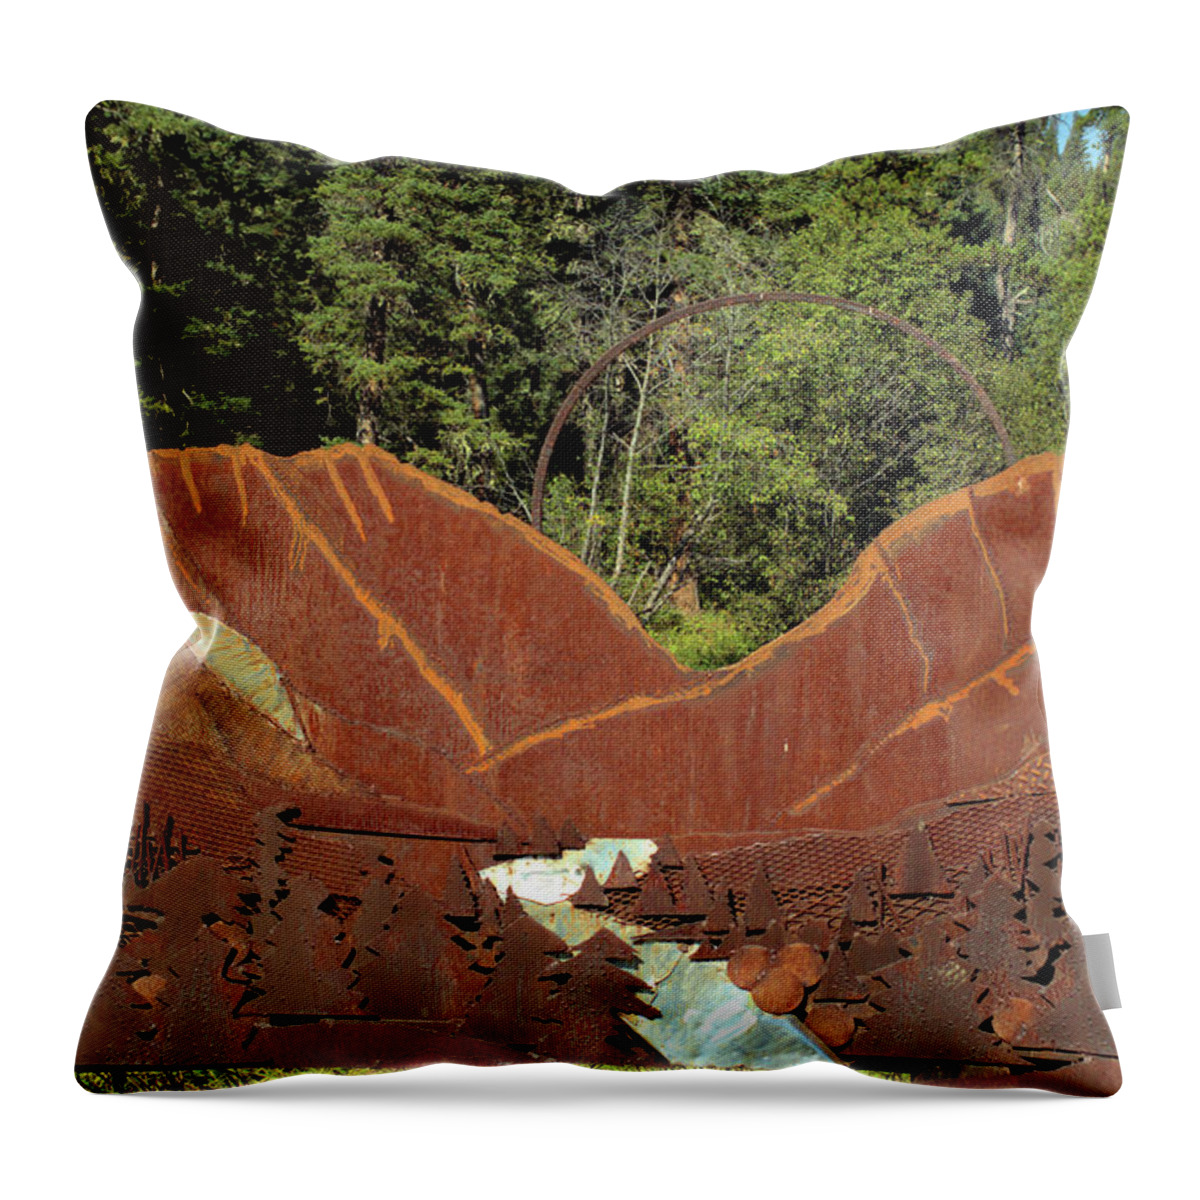 Metal Throw Pillow featuring the photograph Hyalite Canyon Sculpture by Scott Carlton